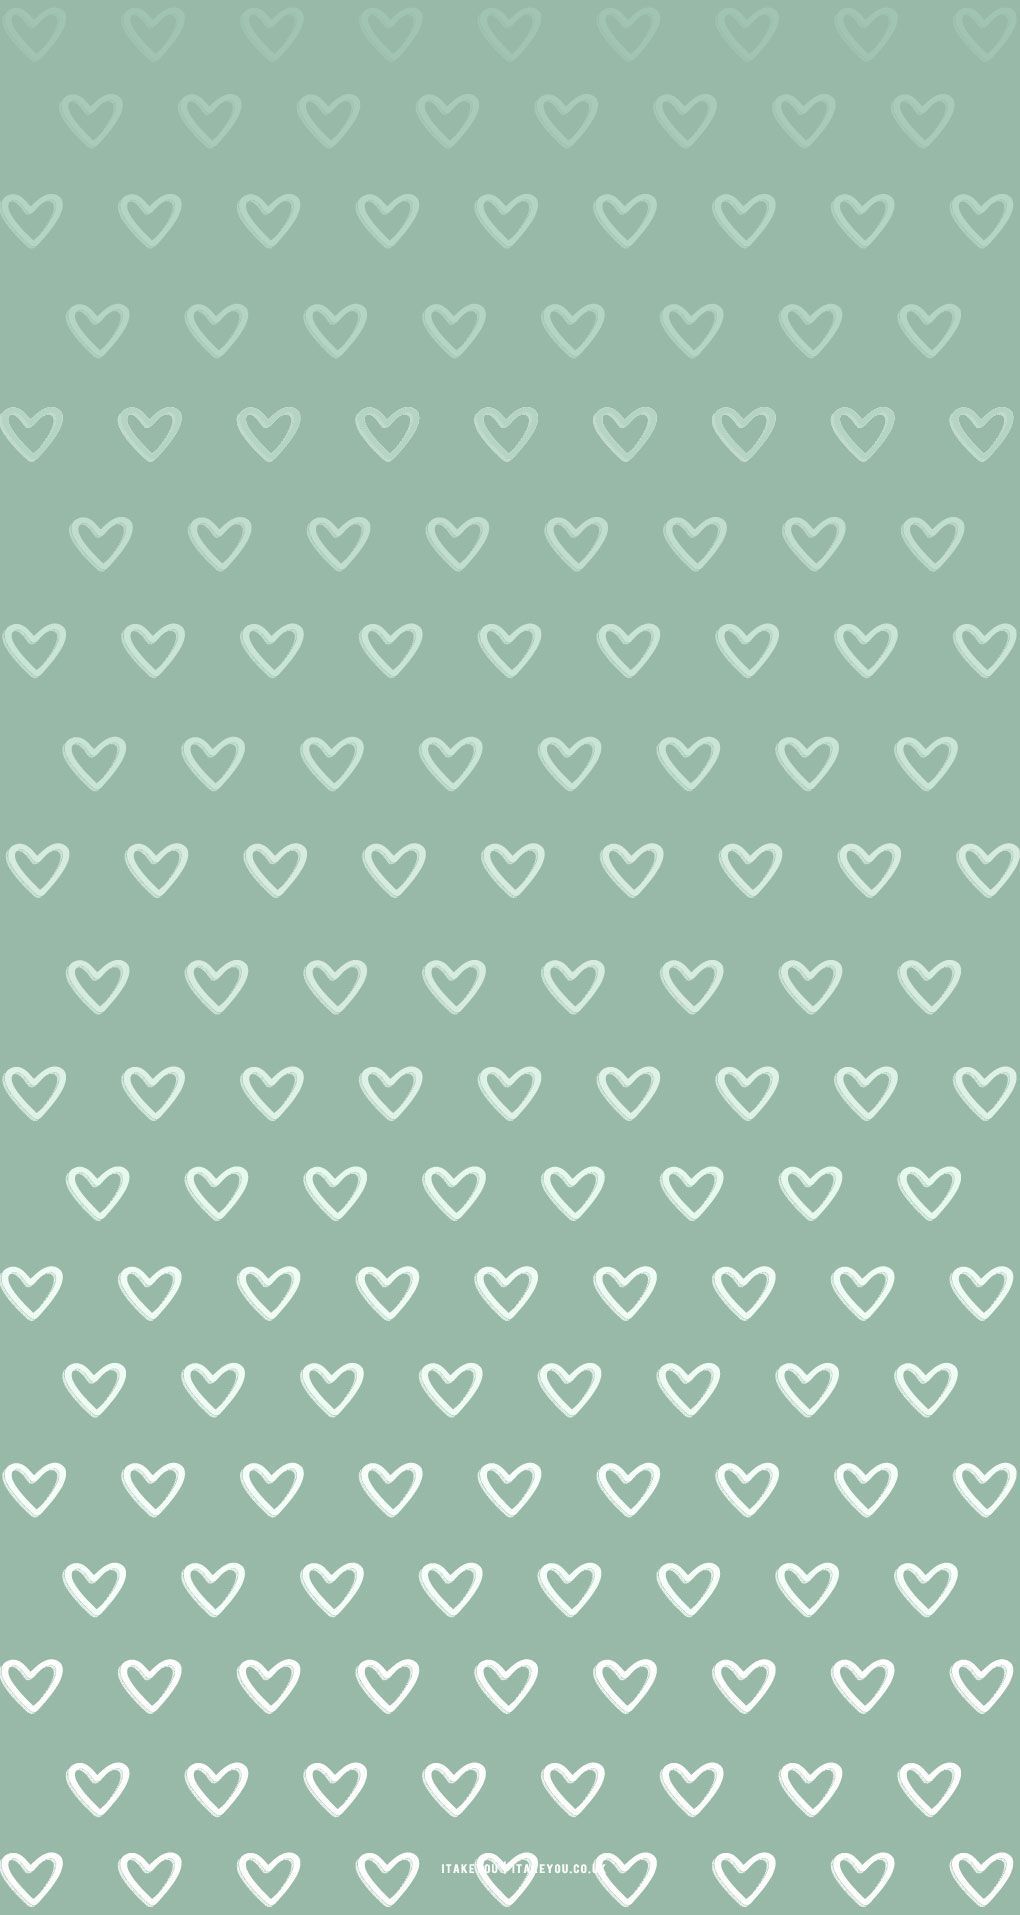 A pattern of white hearts on green background - Green, heart, sage green